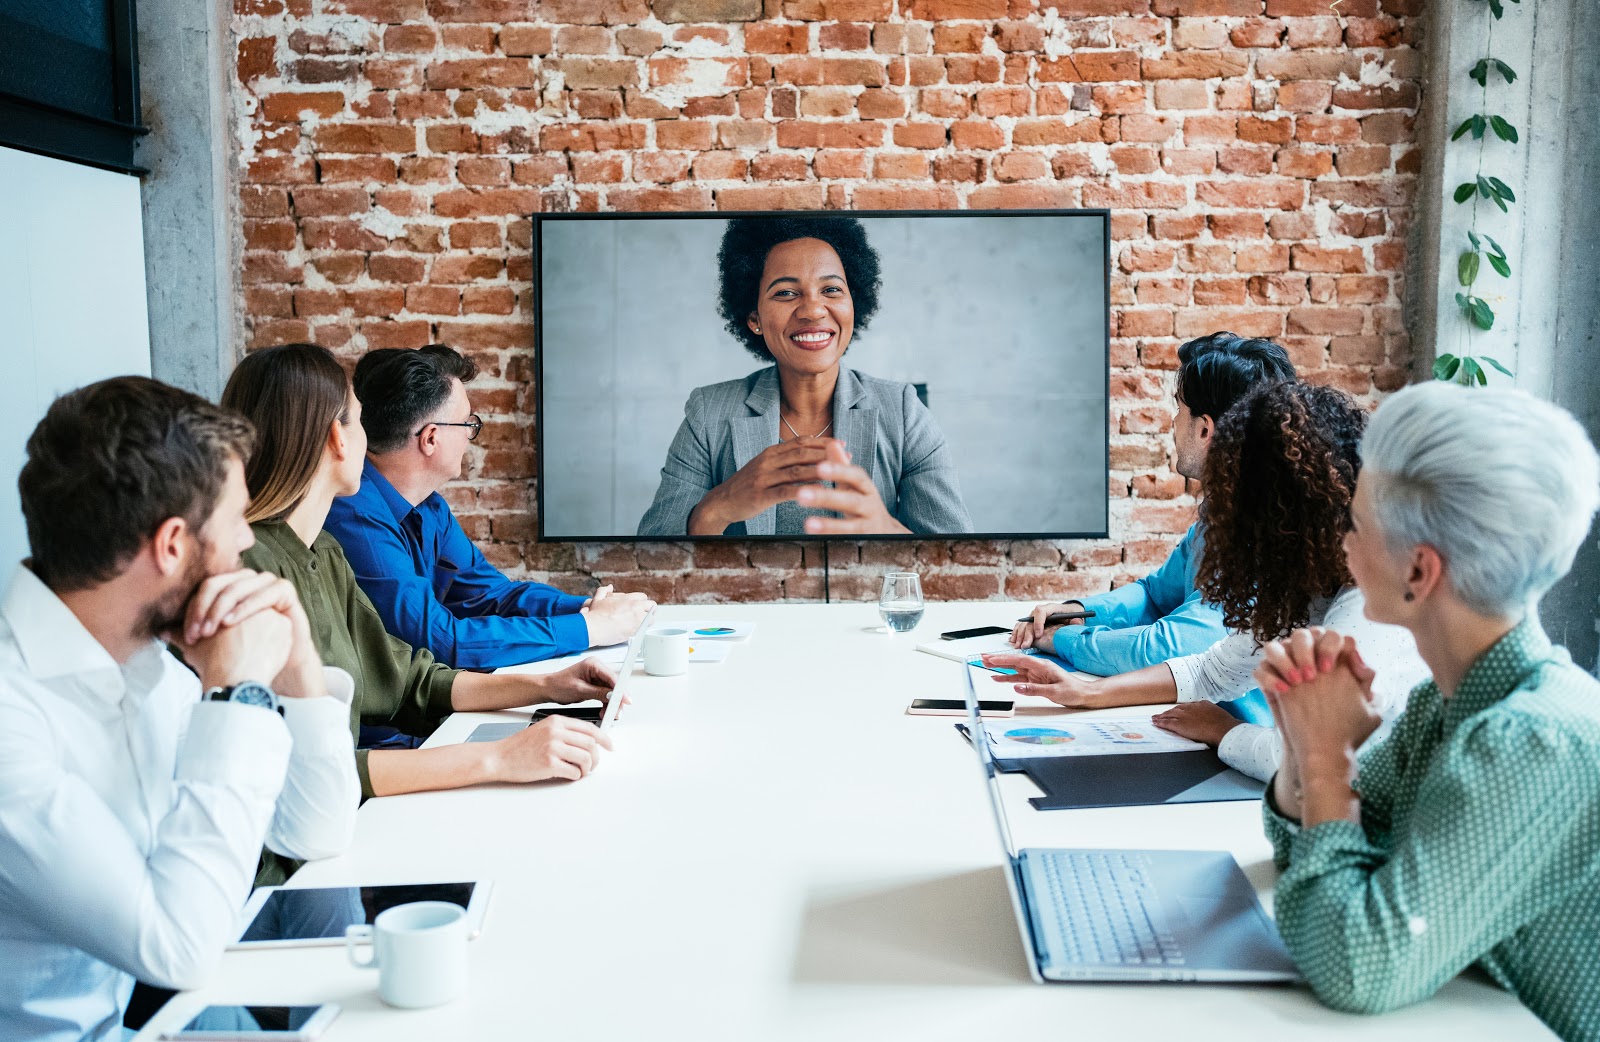 Business people meeting around conference table and looking at woman on screen in video conference